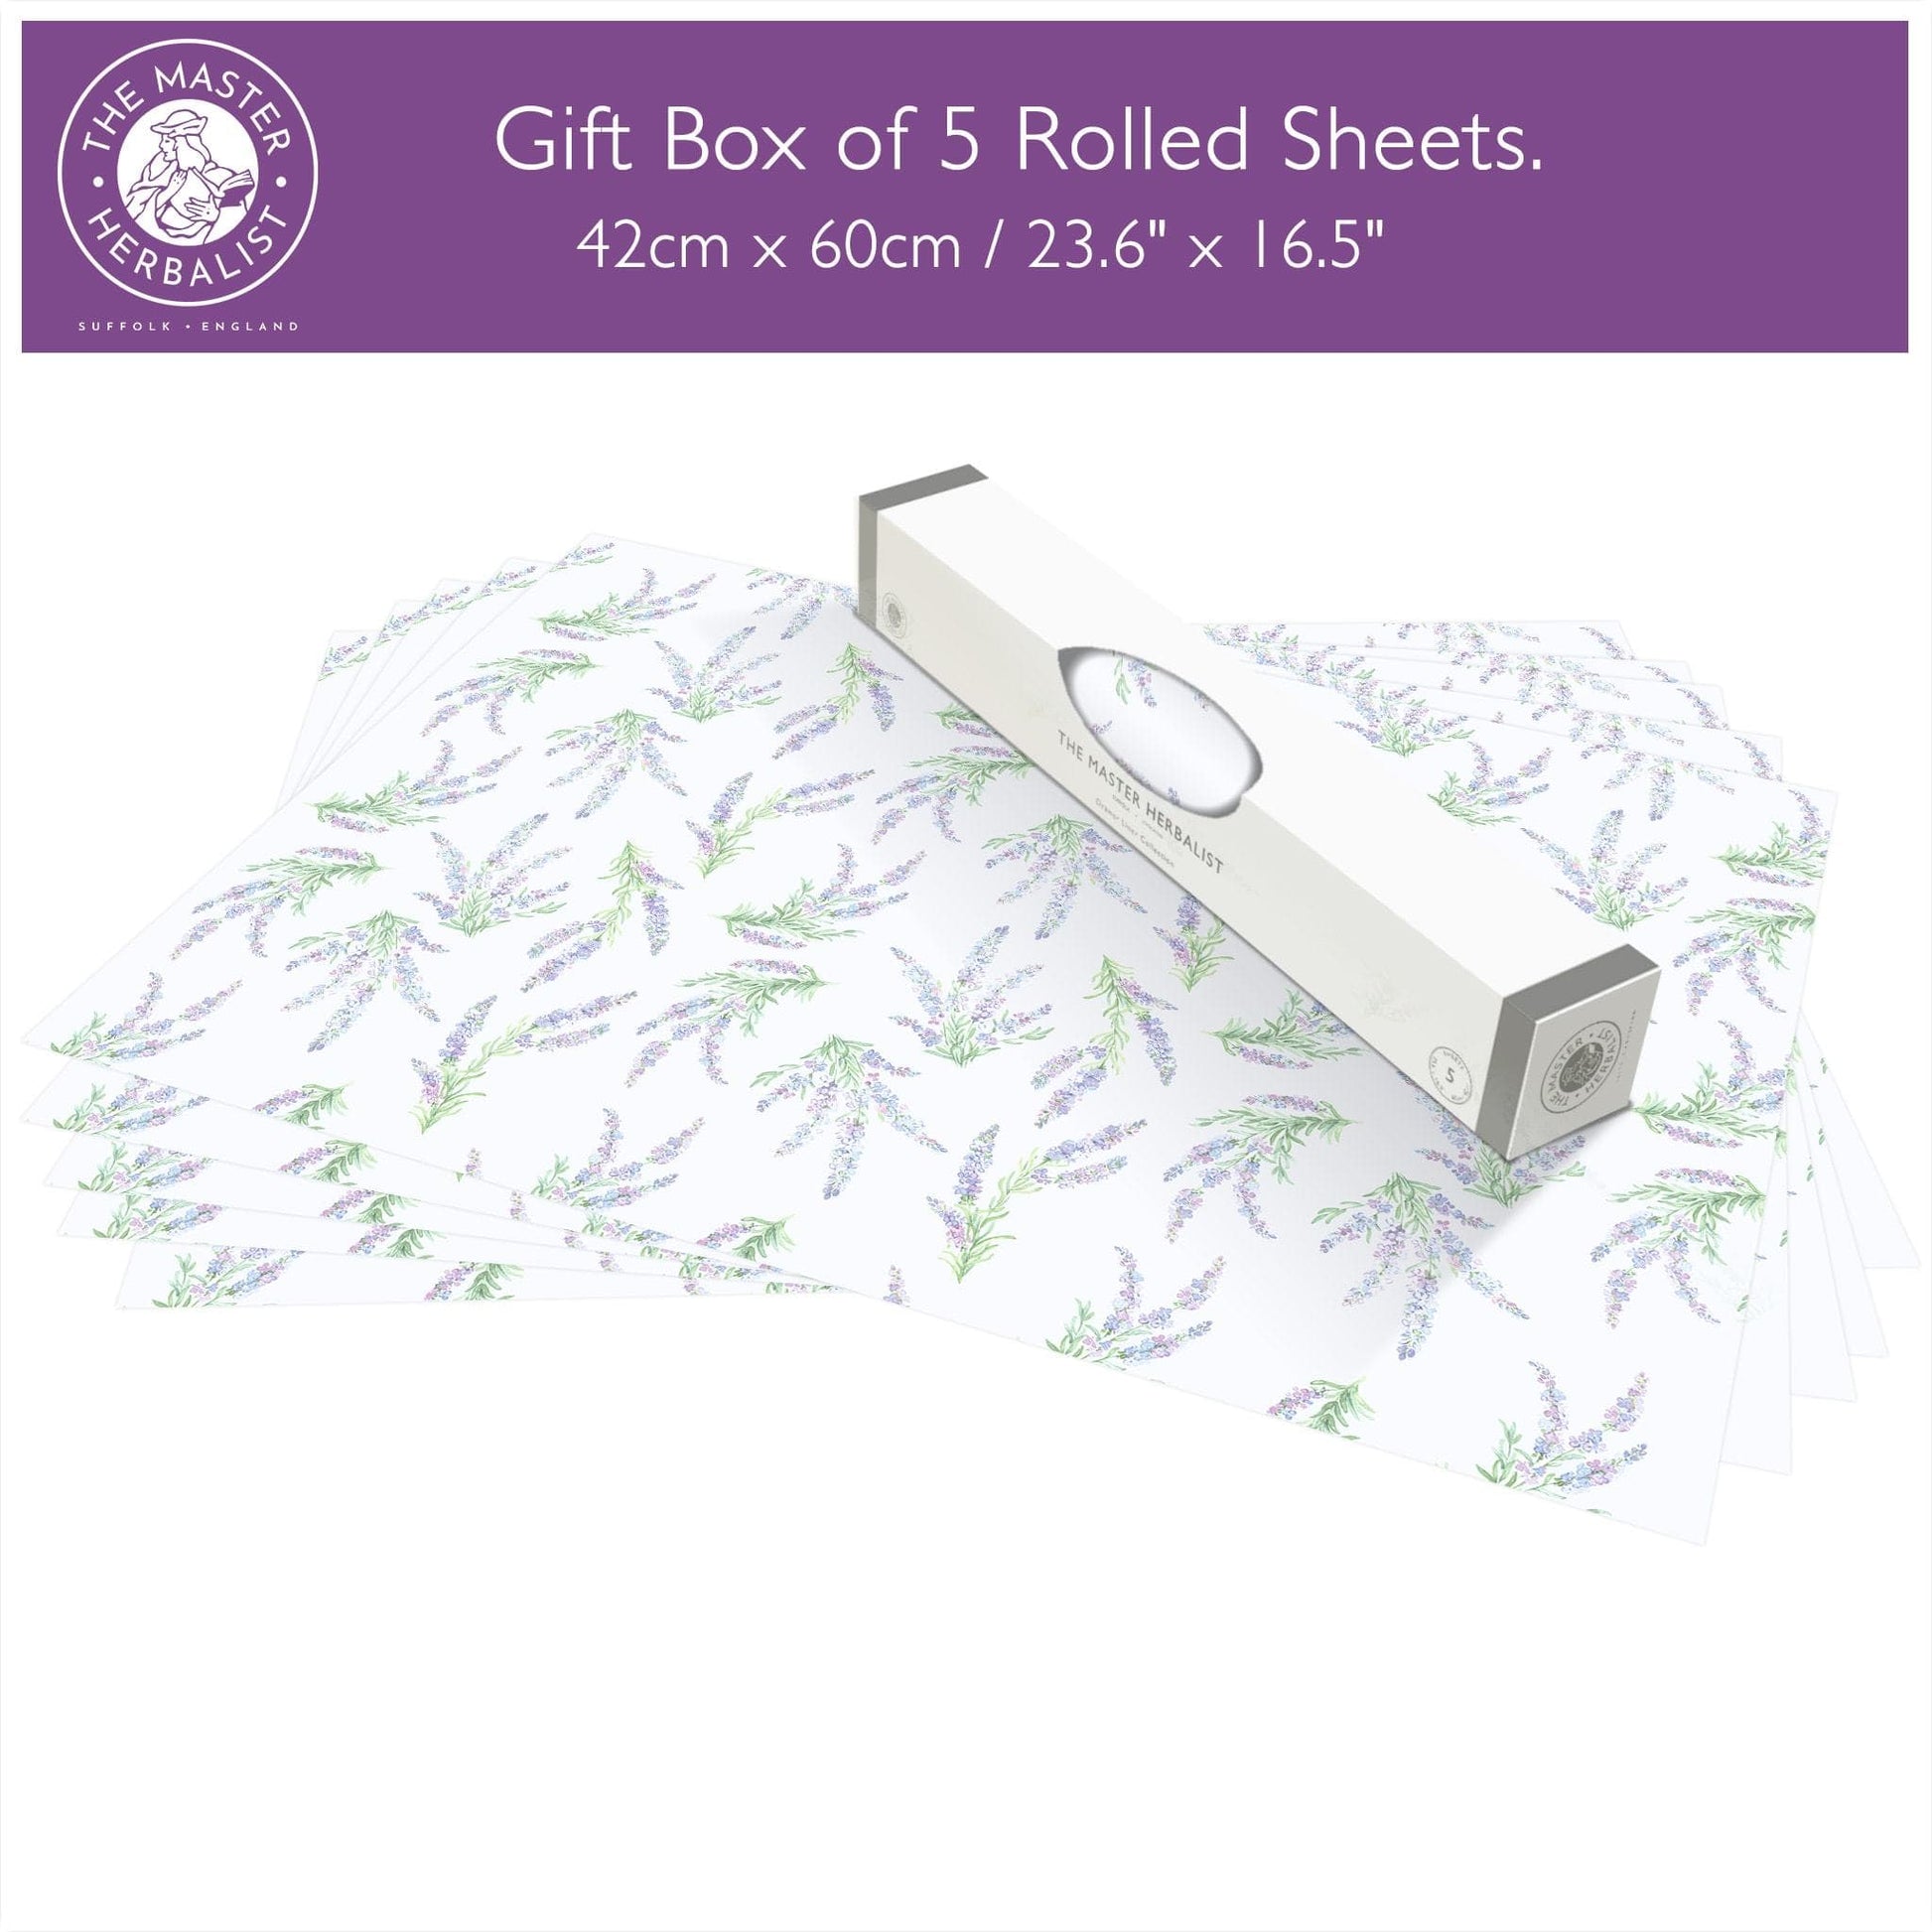 THE MASTER HERBALIST SUFFOLK LAVENDER SCENTED Drawer Liners in a Floral Design. Made in Britain.